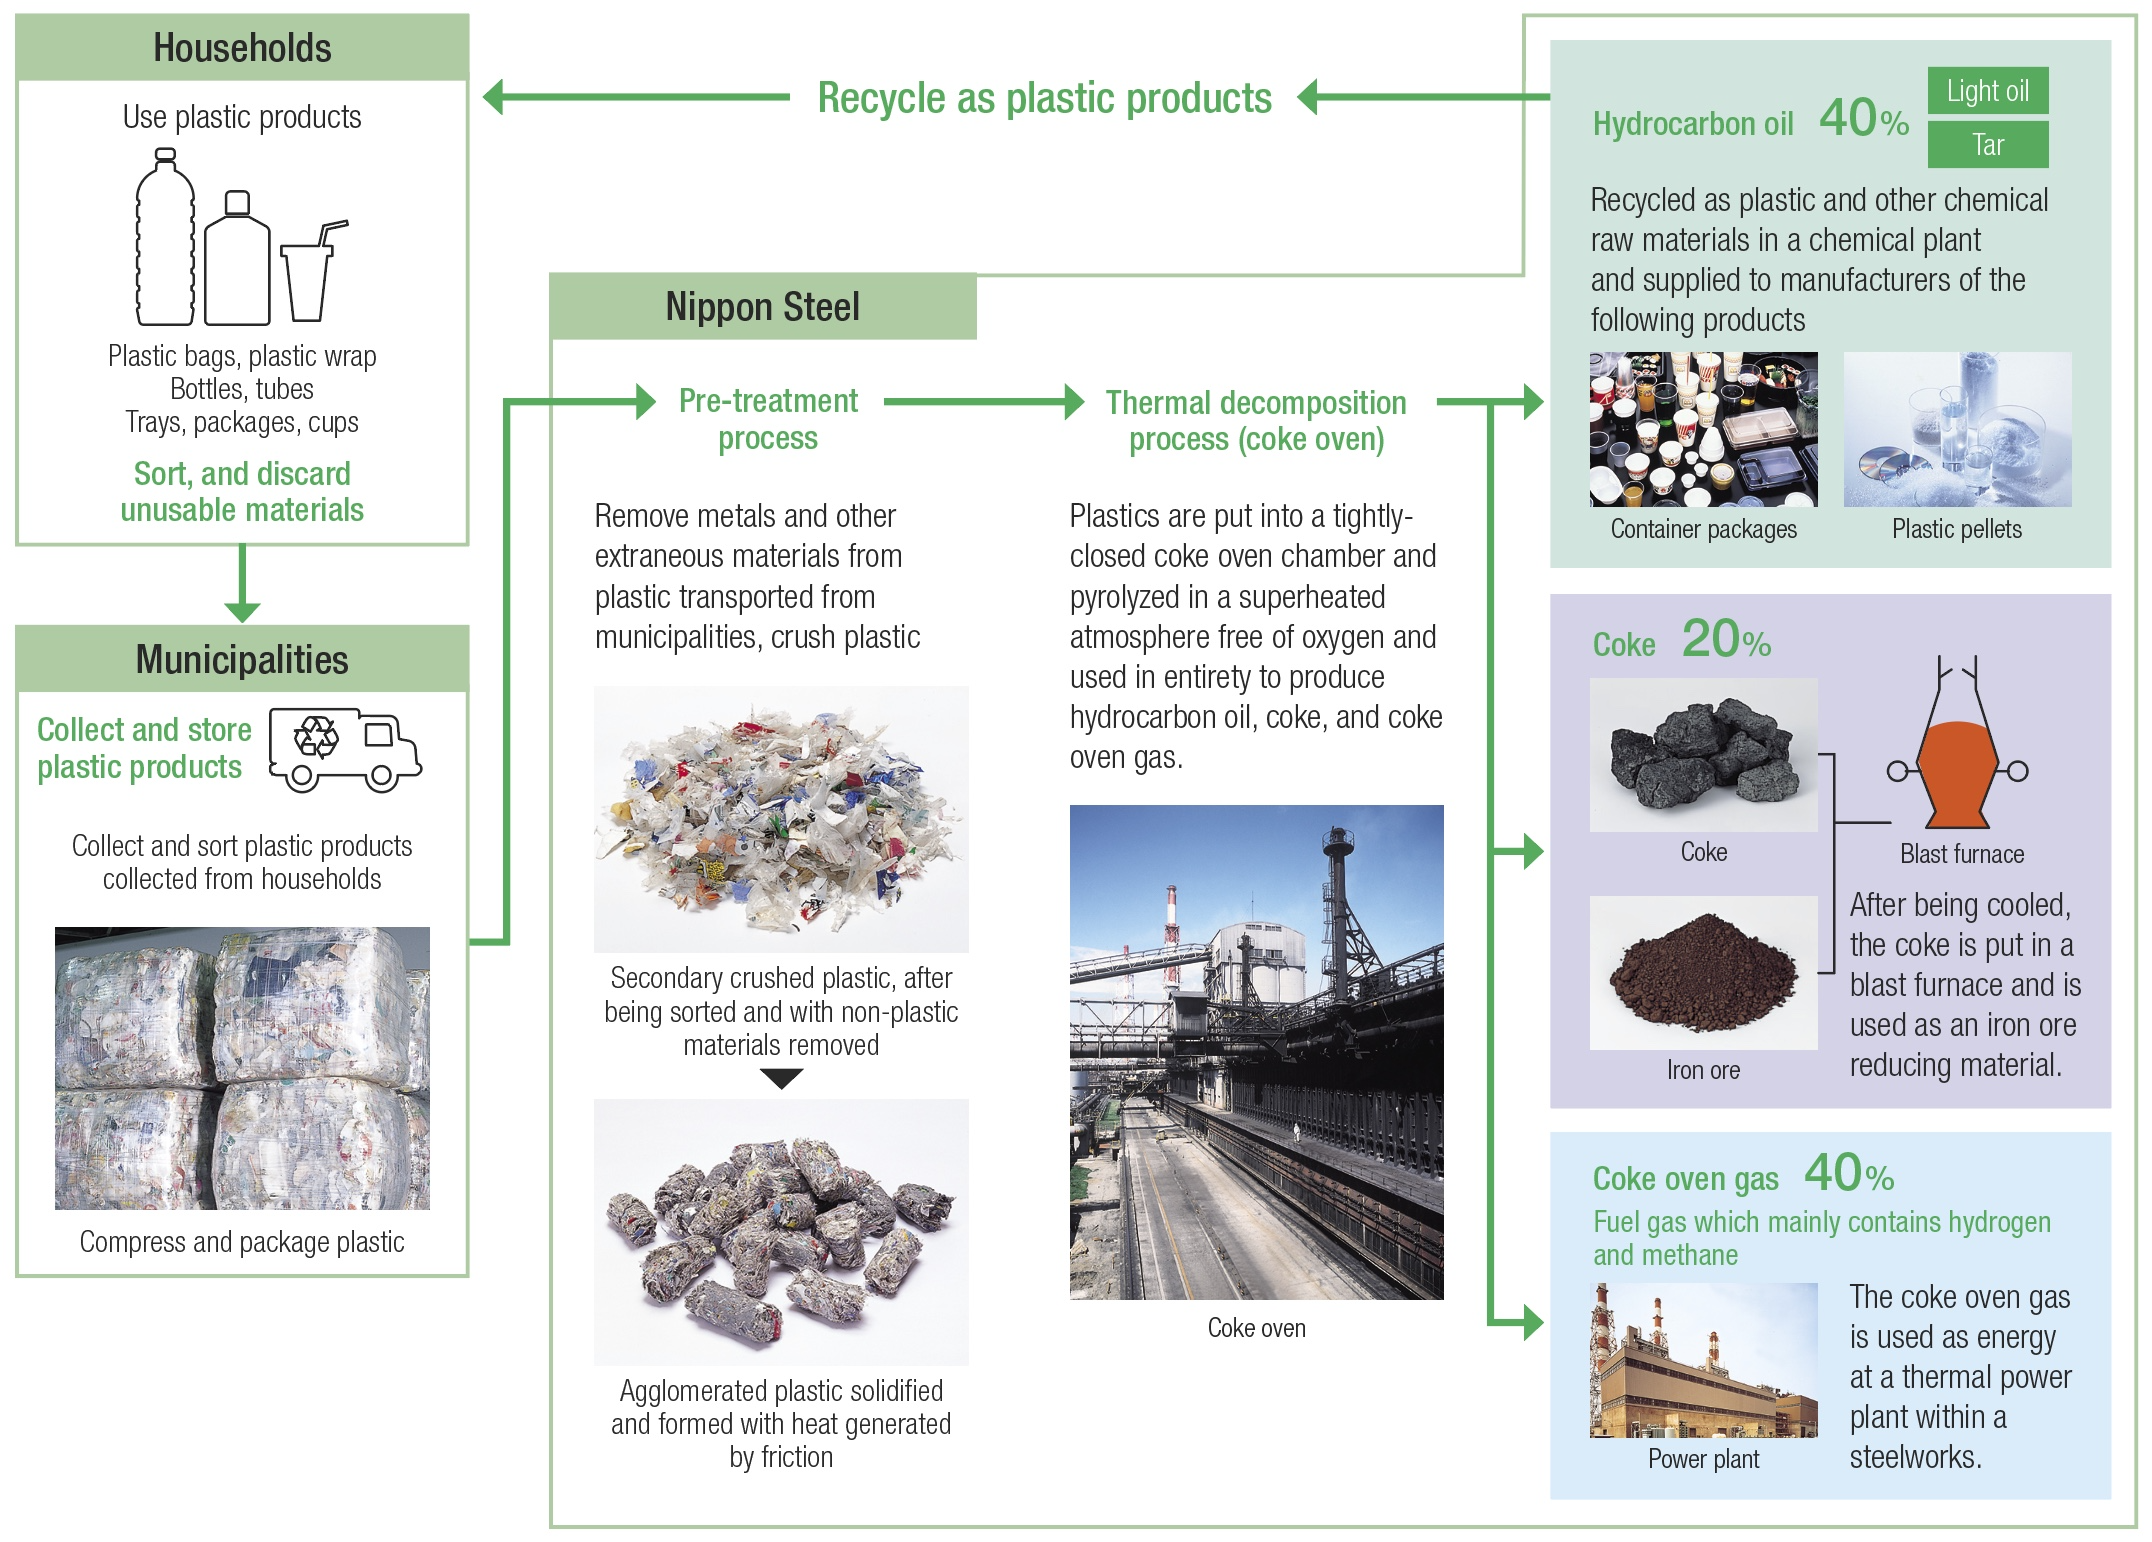 Thermal decomposition enables 100% effective re-use of plastics